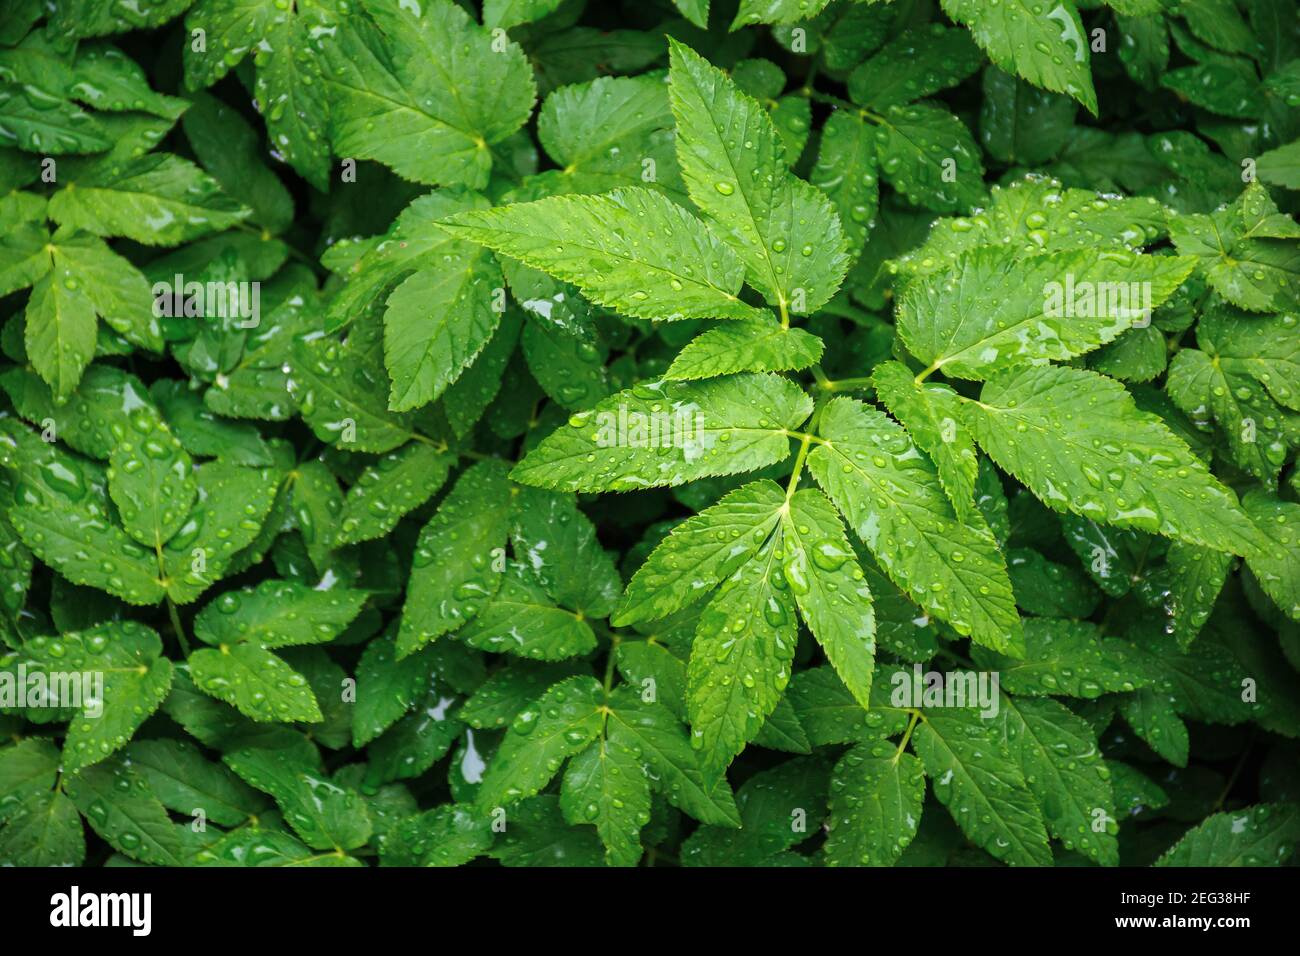 water drops on the green leaves. beautiful close up nature background. freshness concept Stock Photo